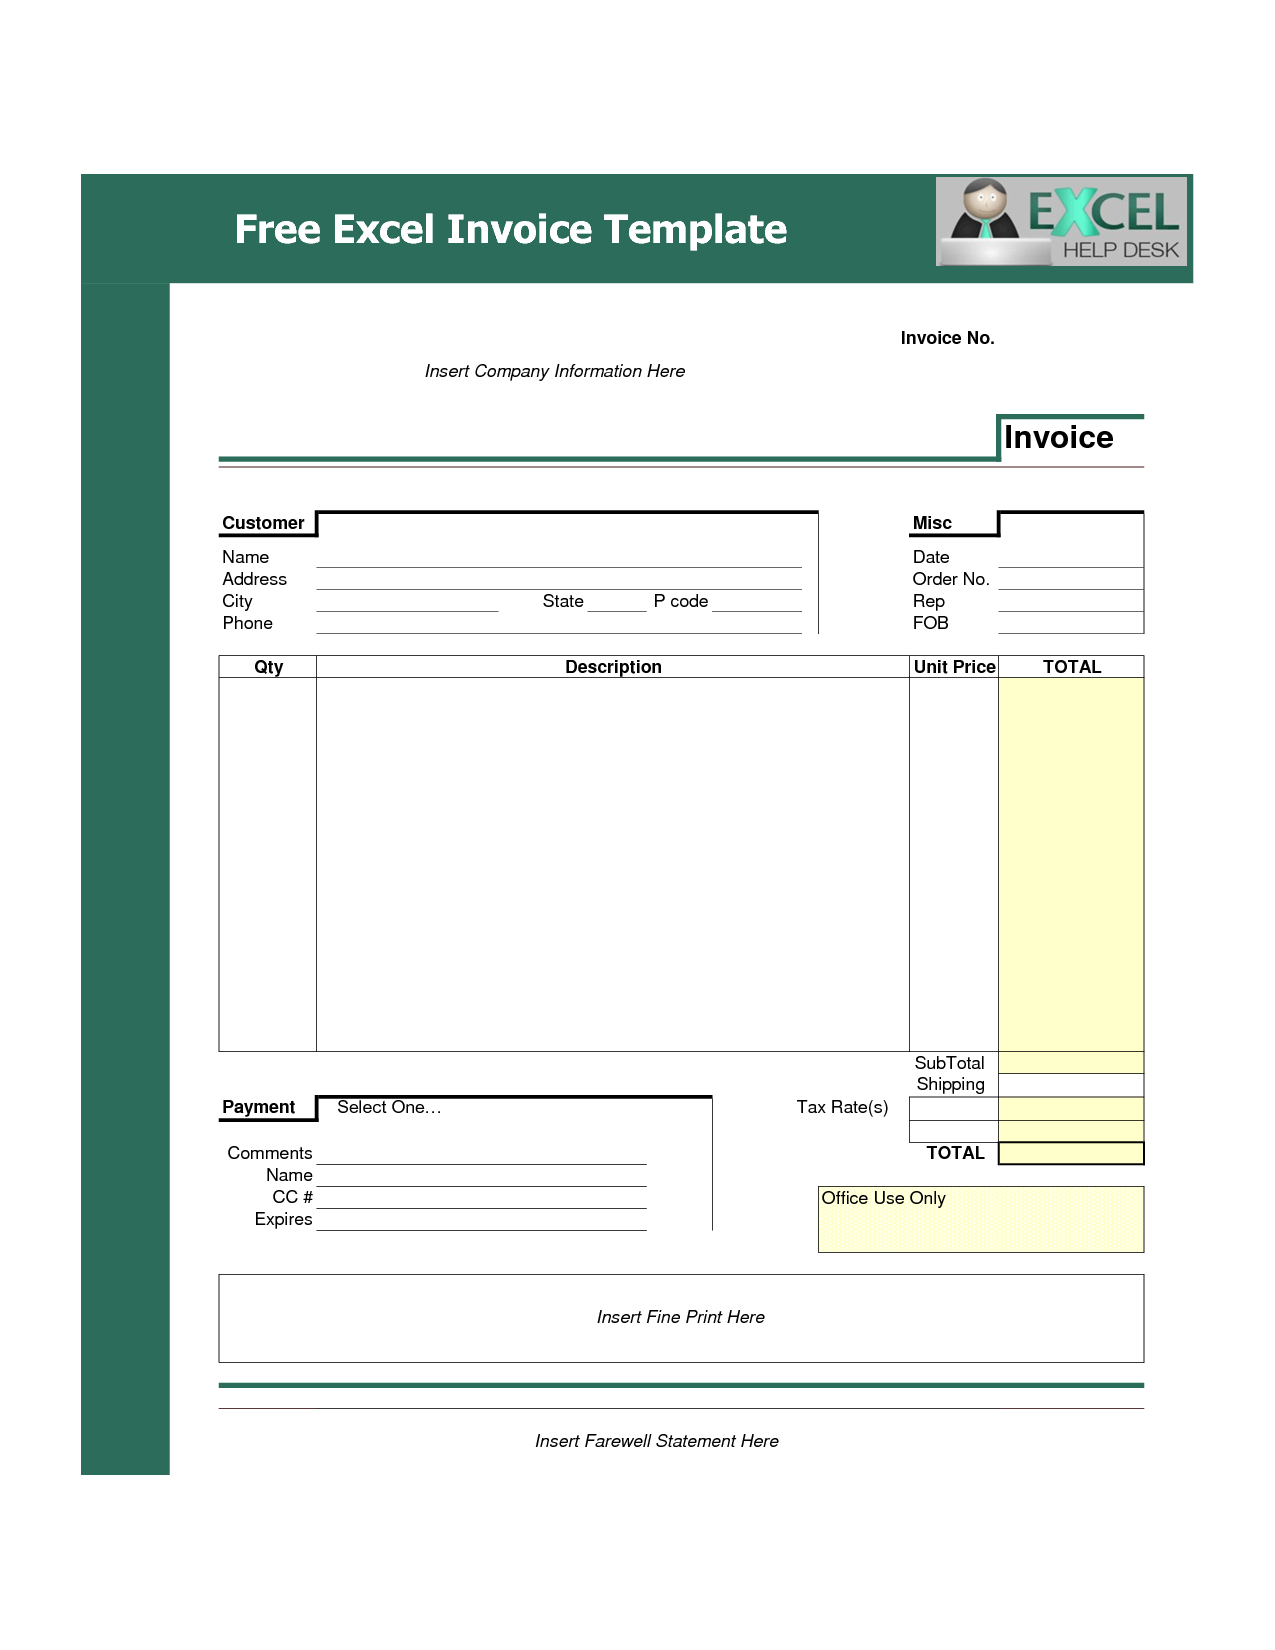 Invoice Template Excel Free Download Free Spreadsheet Excel Spreadsheet 